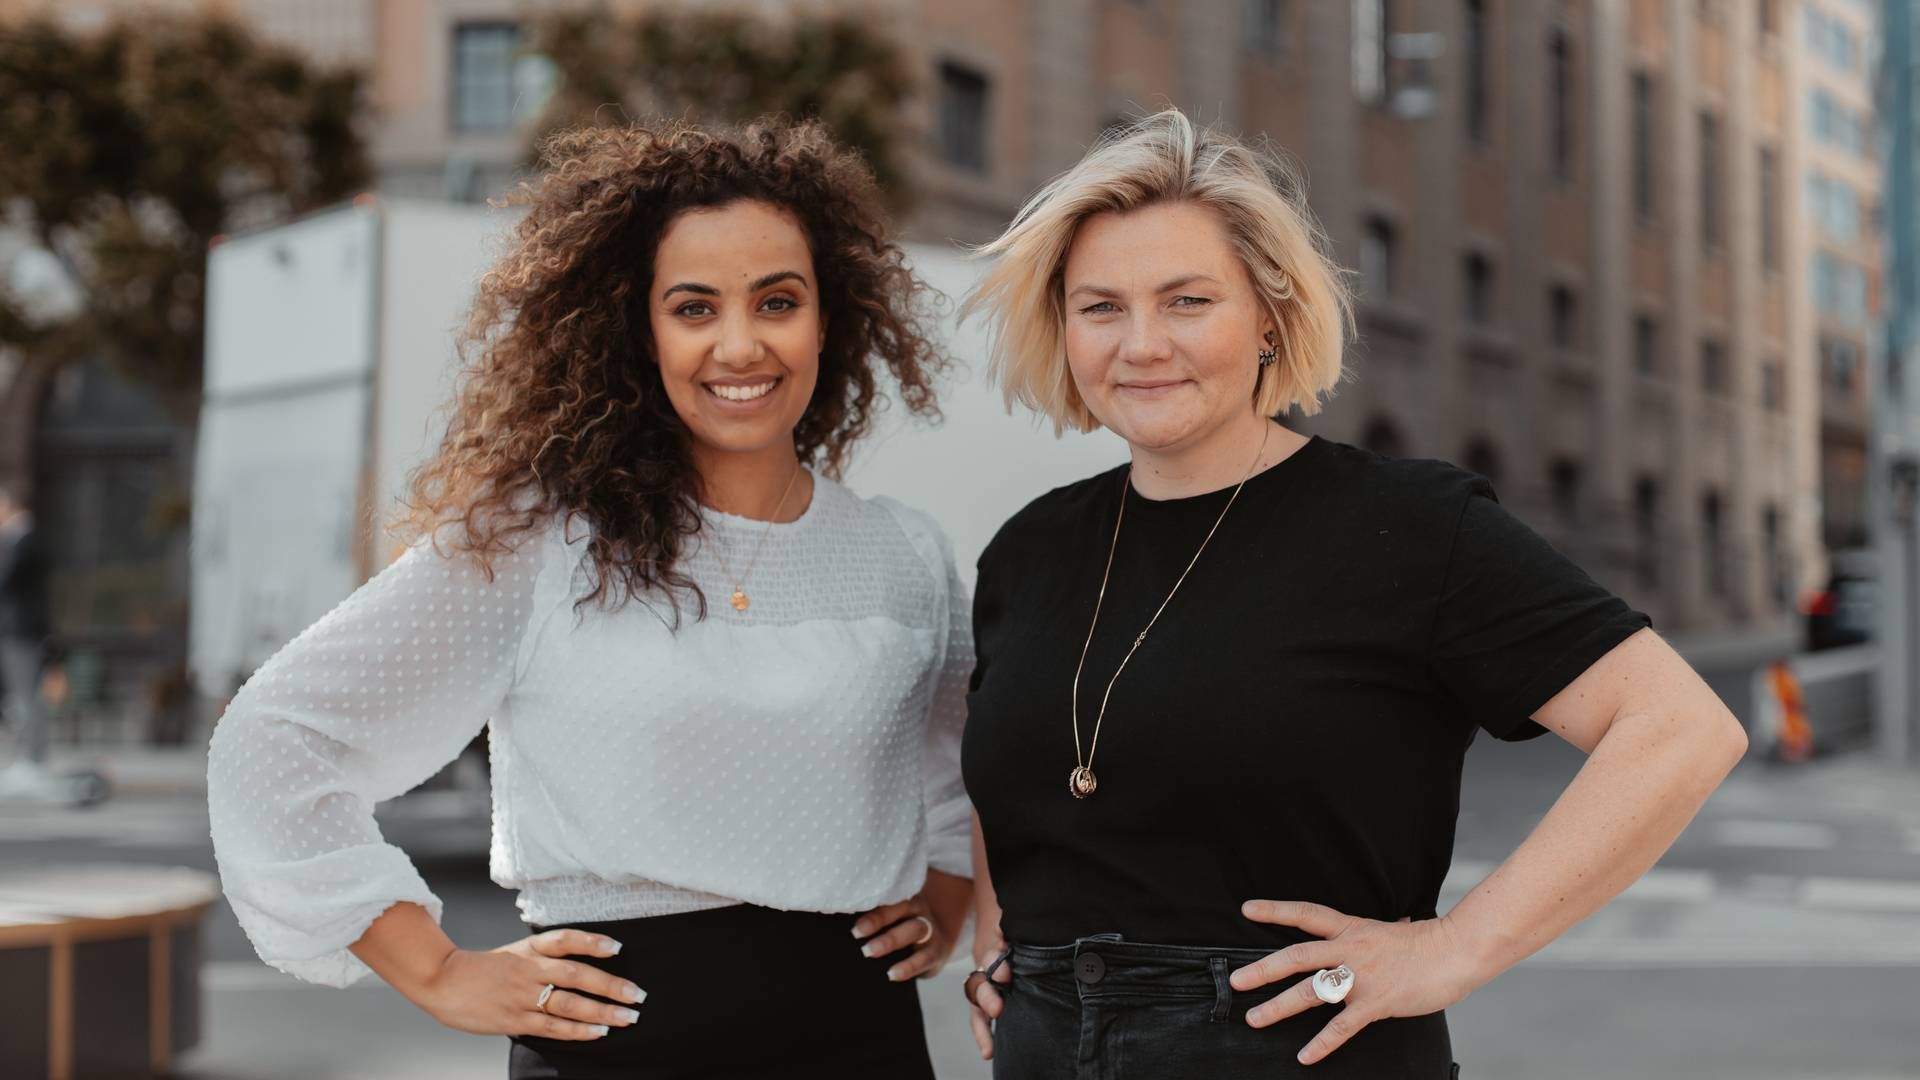 Thea Messel (right) founded Unconventional Ventures in 2019 and has since been joined by Nora Bavey (left) as General Partner. | Photo: Unconventional Ventures / PR